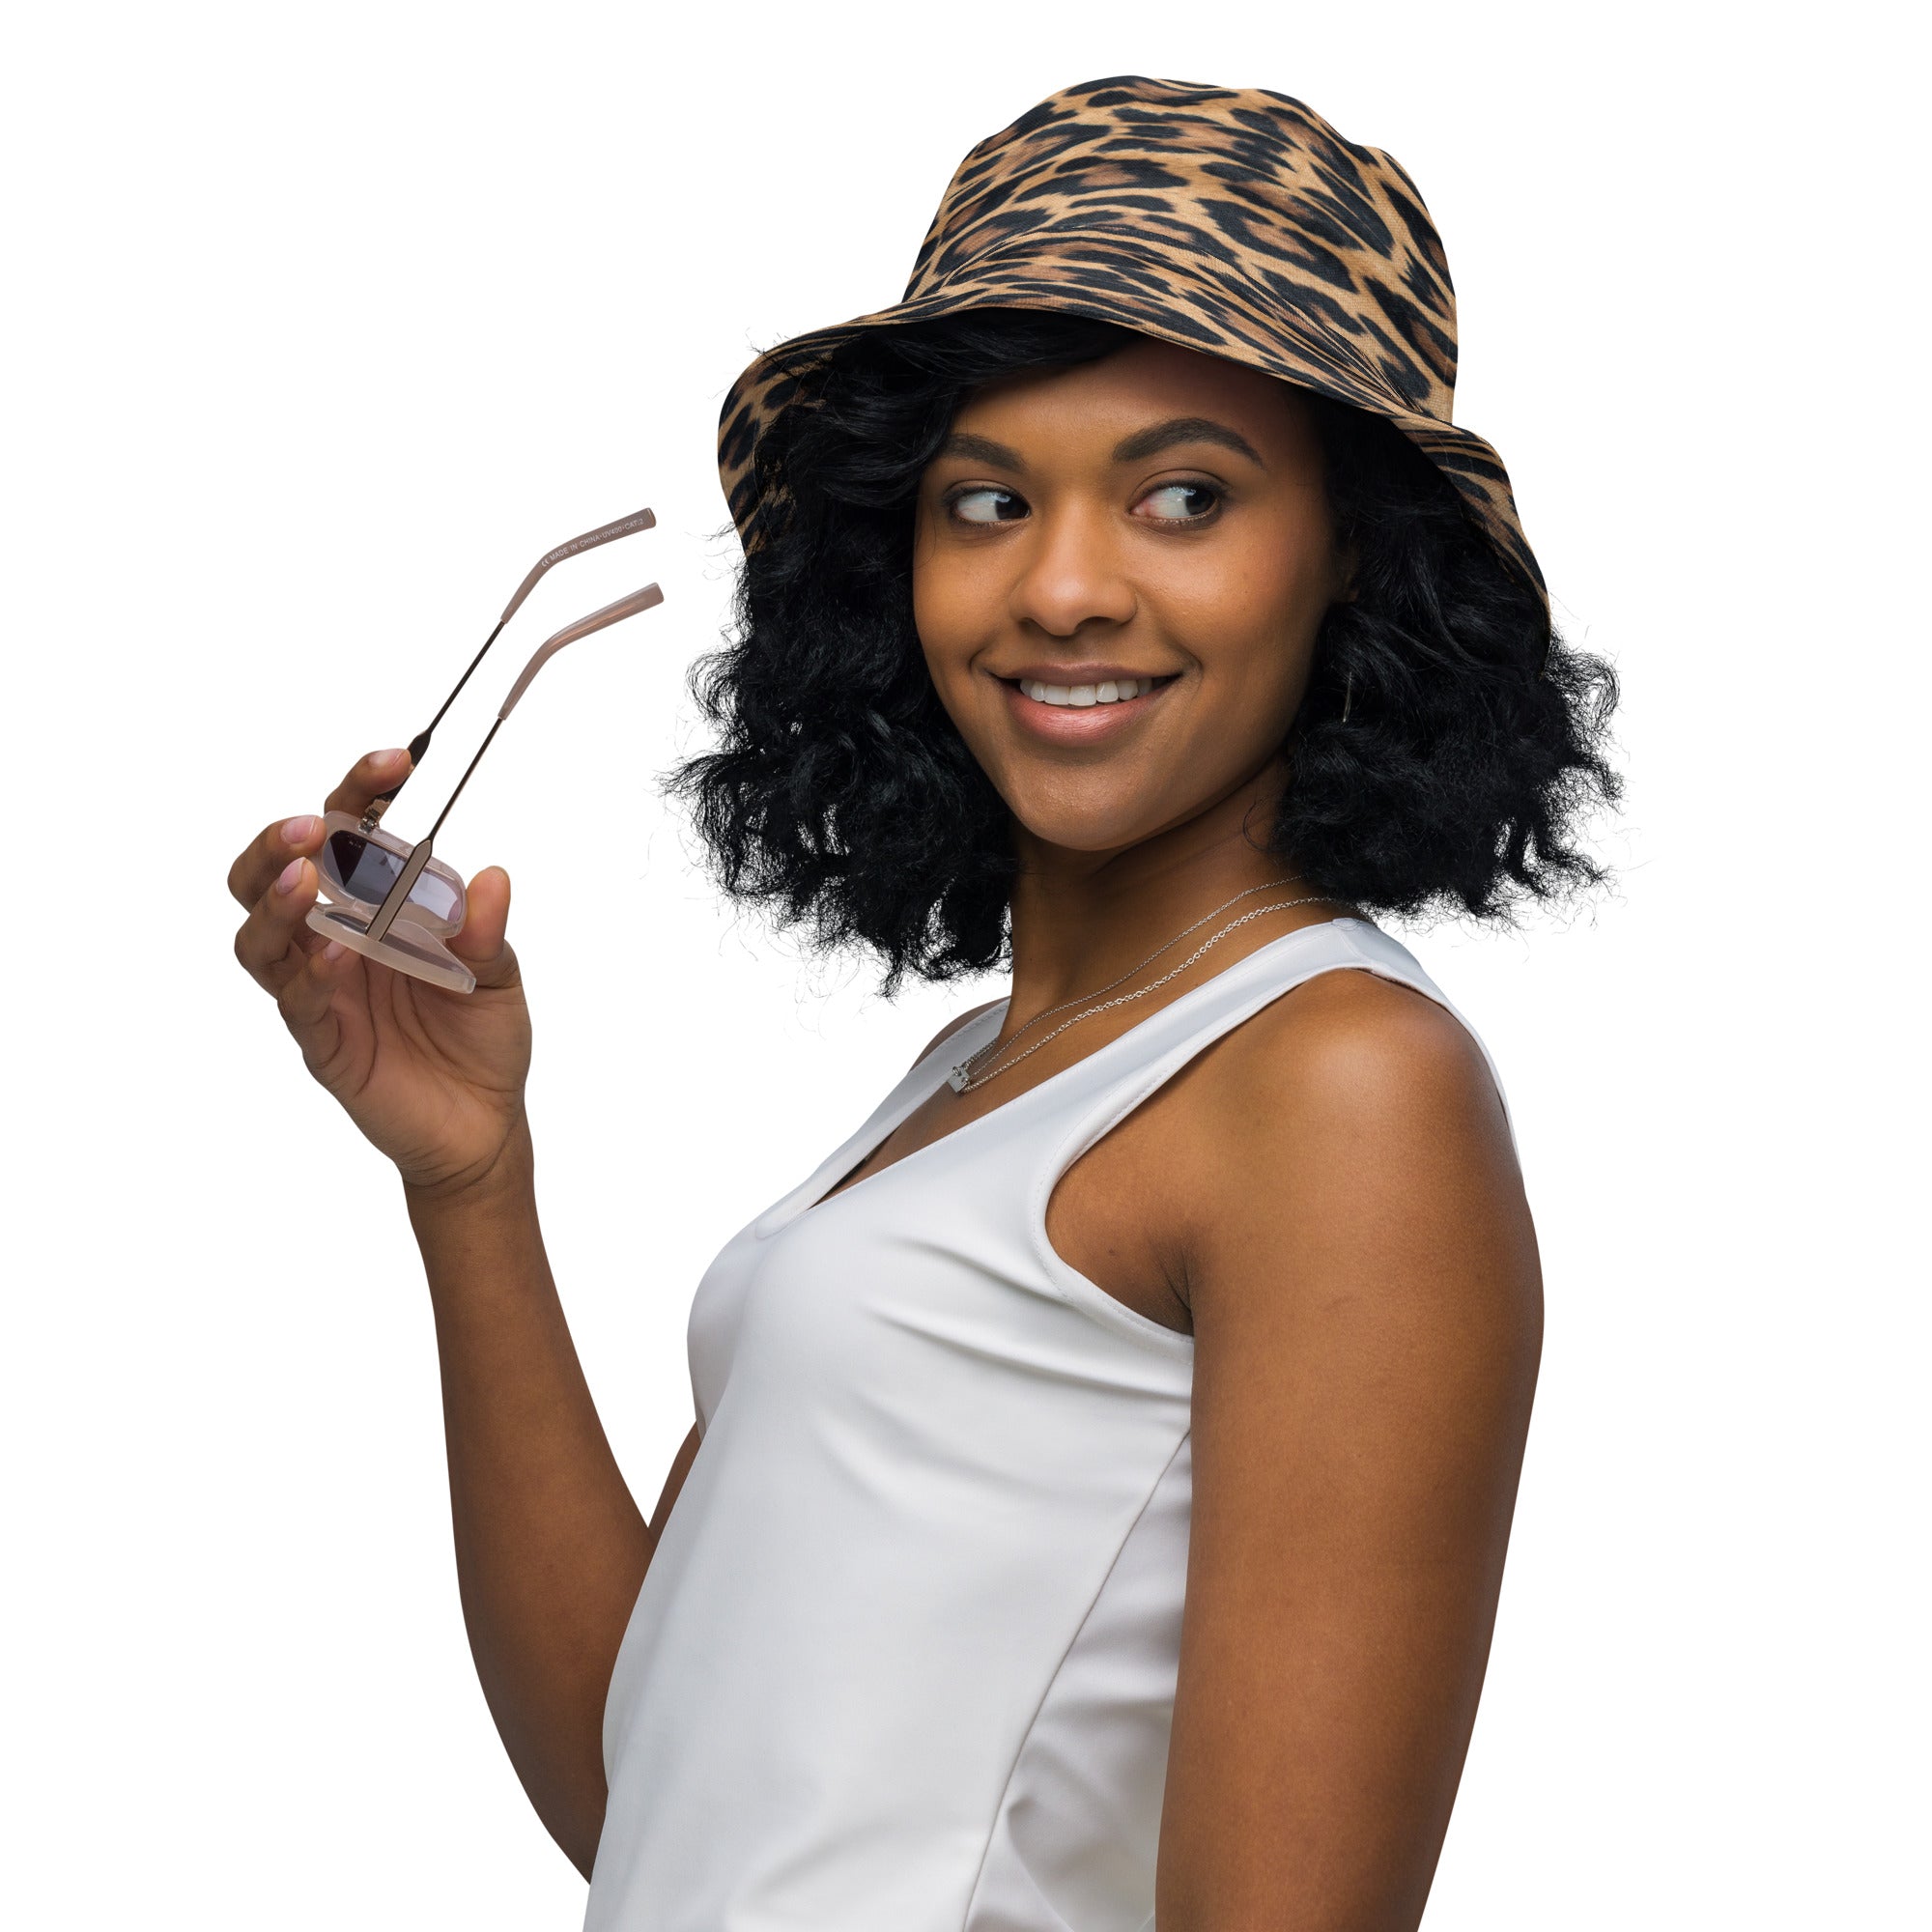 "Wild Chic: Embrace the Jungle with Our Leopard Print Bucket Hat", lioness-love